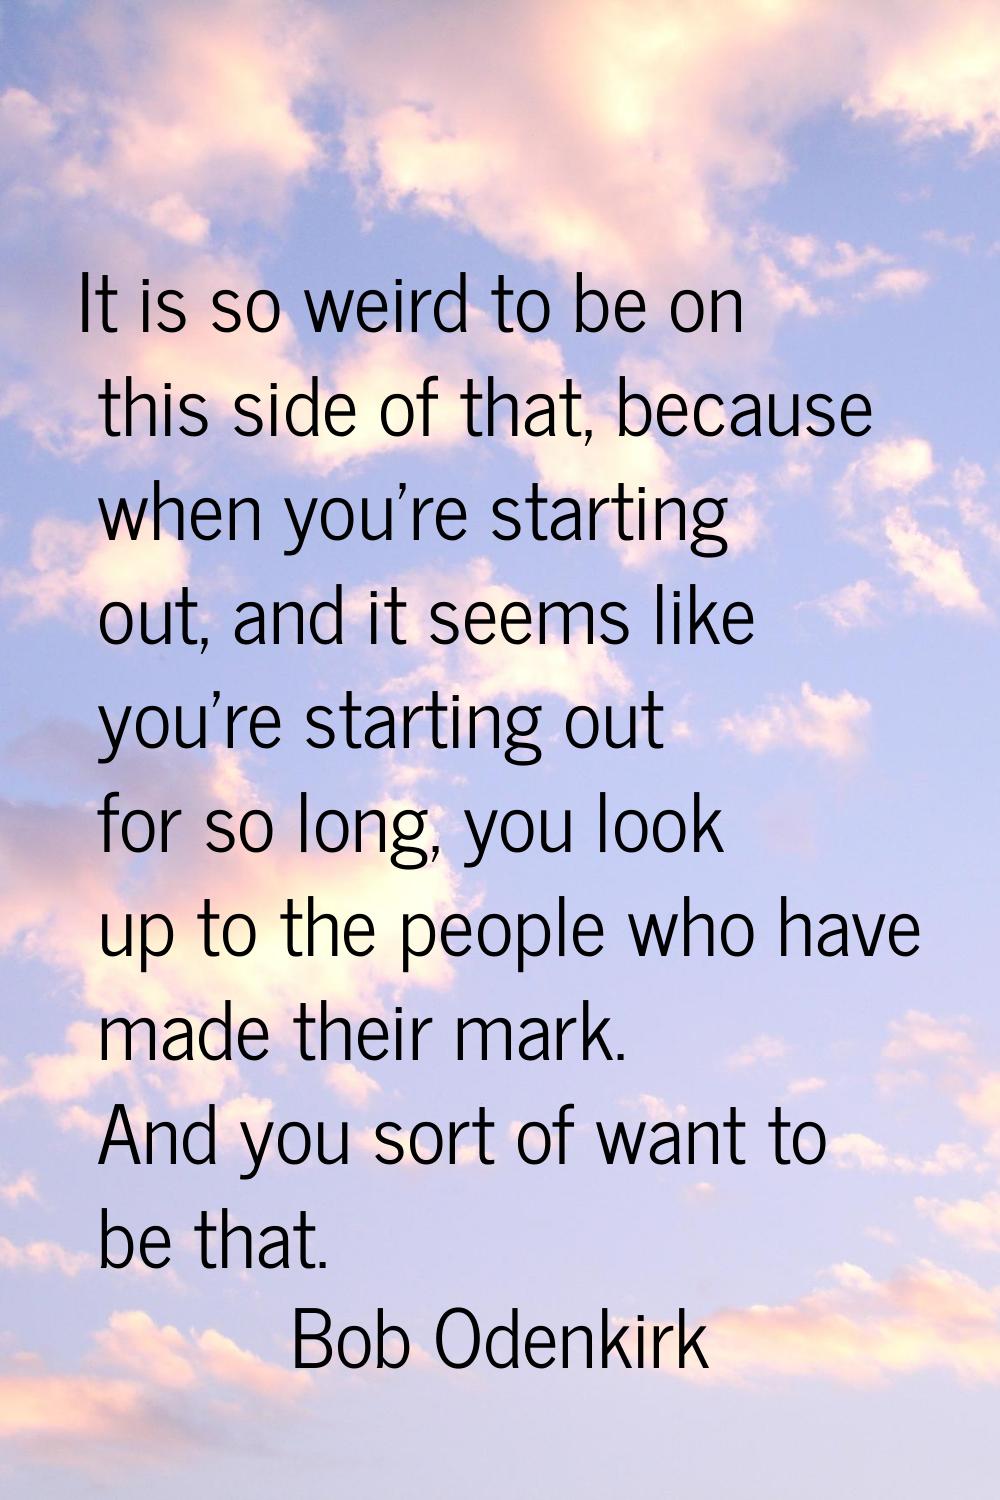 It is so weird to be on this side of that, because when you're starting out, and it seems like you'